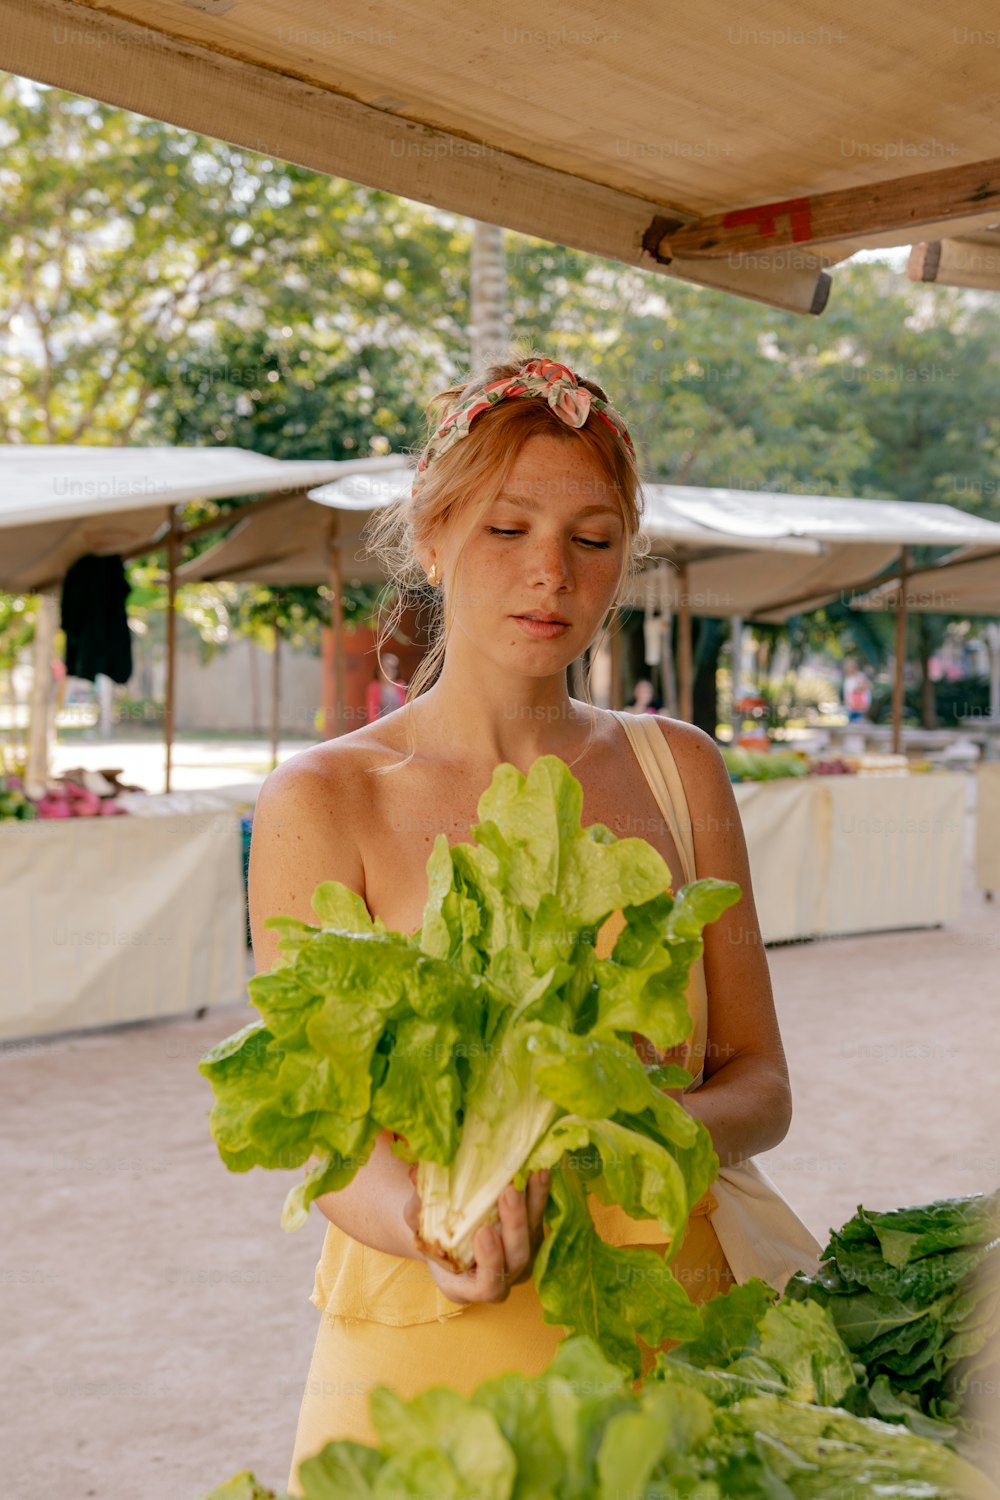 a woman in a yellow dress holding a bunch of lettuce